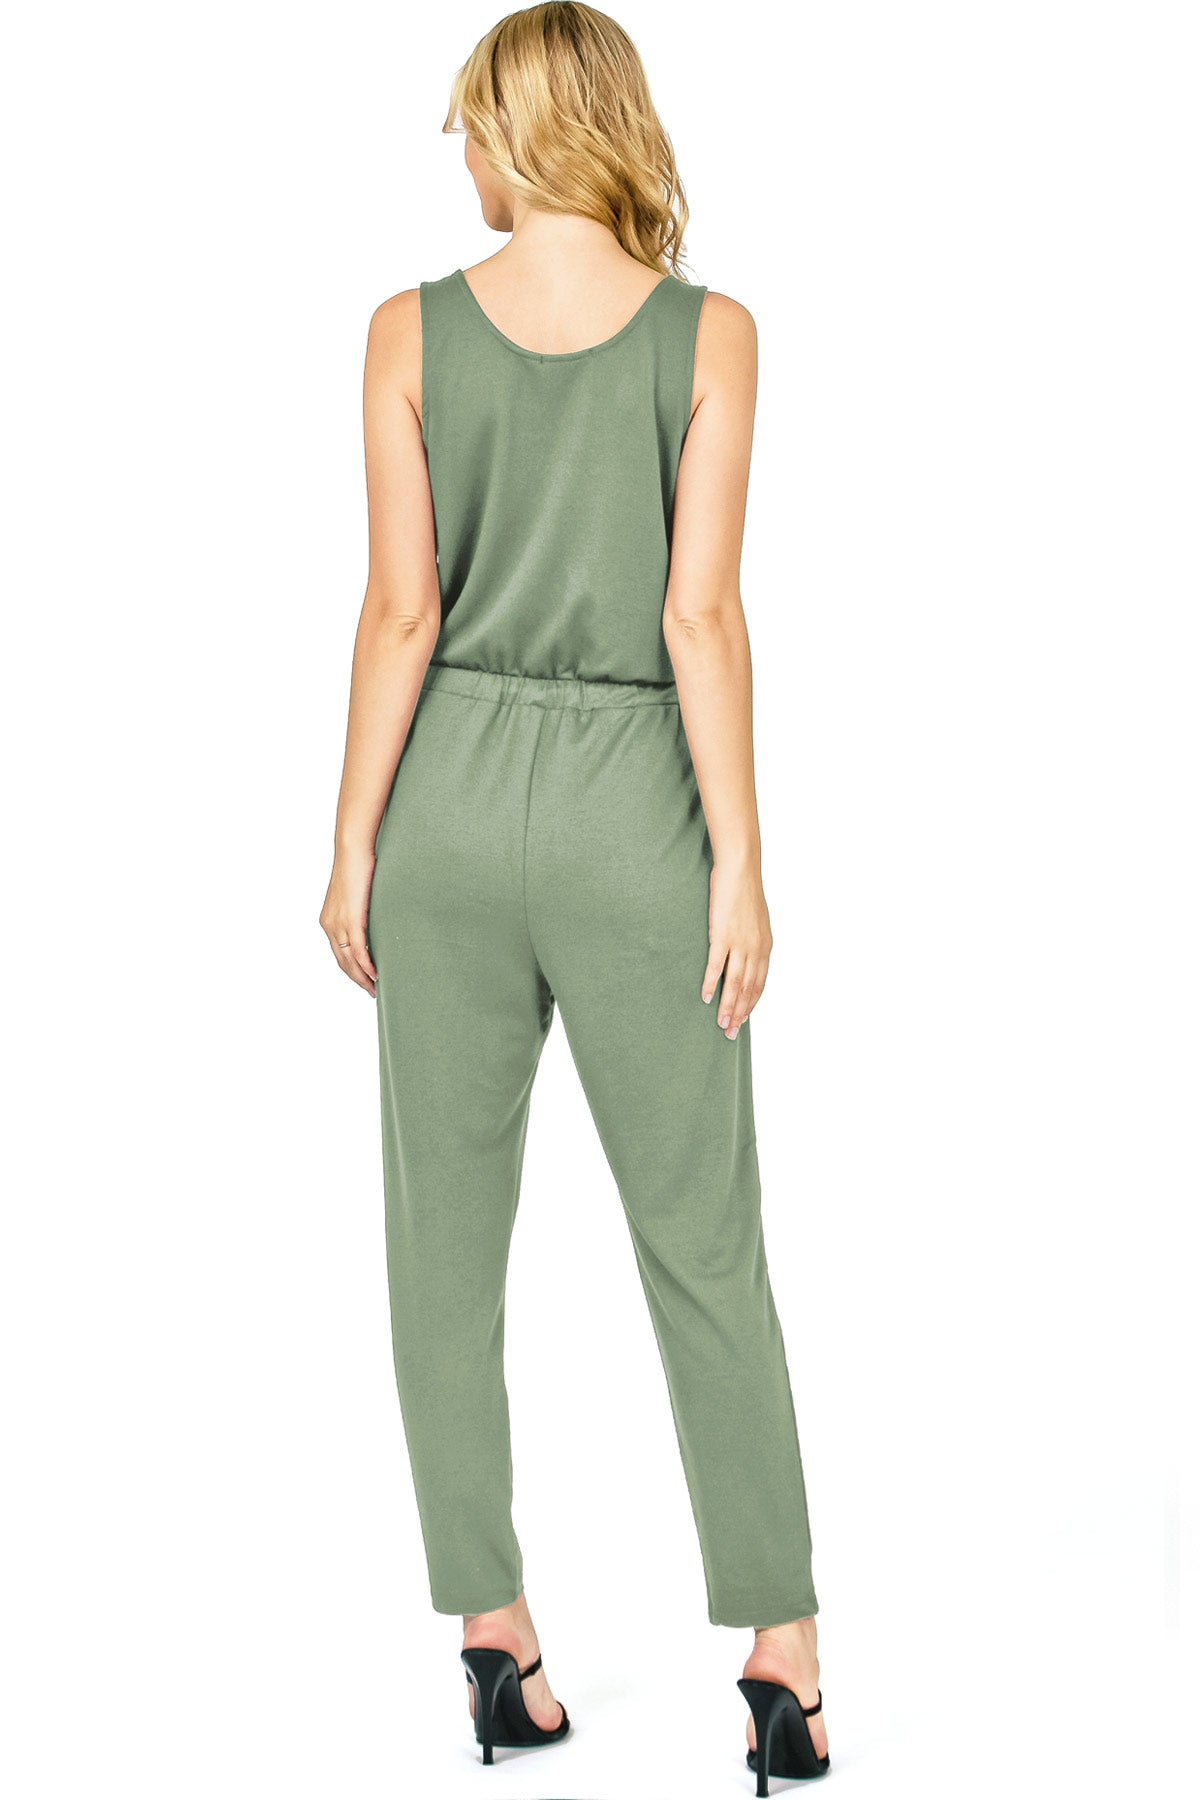 Lounge Jogger Jumpsuit - Pink Ice